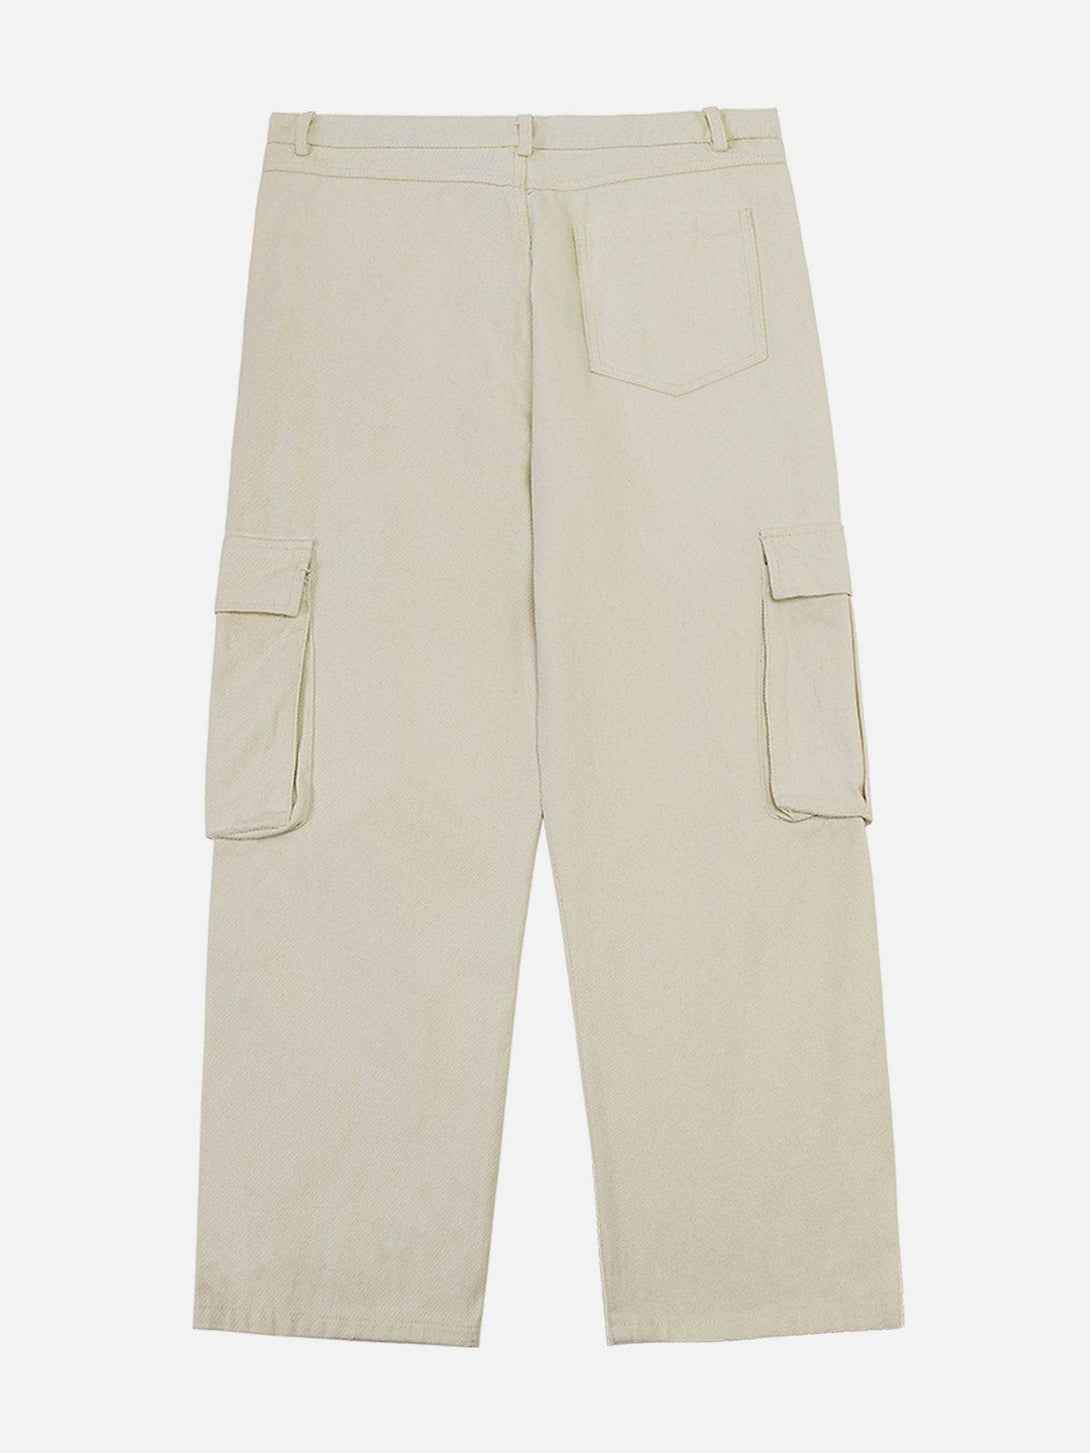 Levefly - Patchwork Loose Cargo Pants - Streetwear Fashion - levefly.com